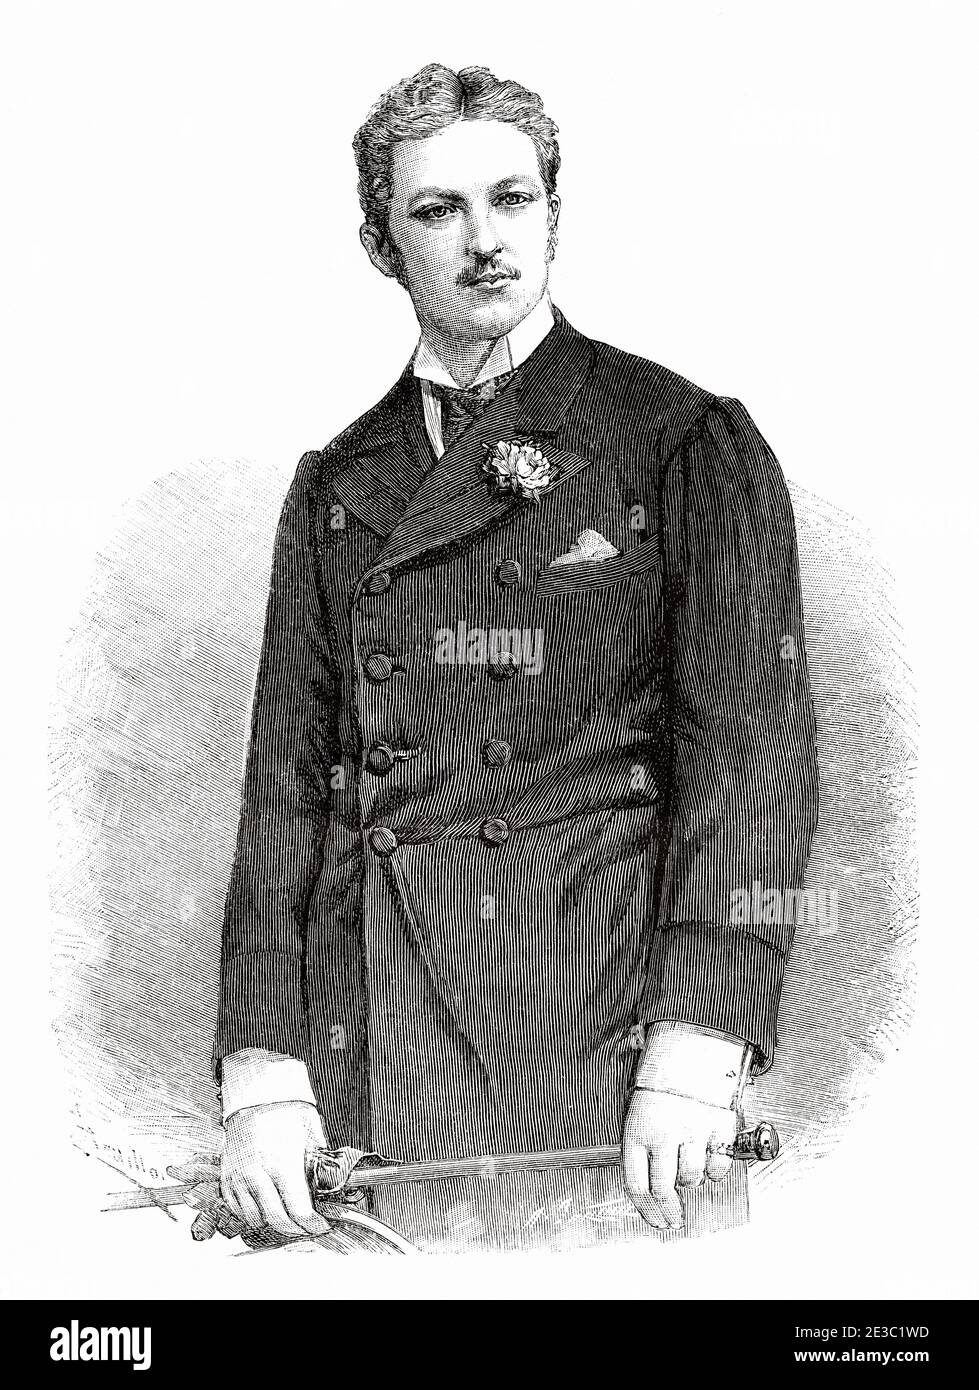 Portrait of Portrait of Louis Philippe Robert of Orleans (Twickenham 1869 - Palermo 1926) known to his supporters as Louis Philippe III or Philip VIII. Old XIX century engraved illustration from La Ilustracion Española y Americana 1890 Stock Photo